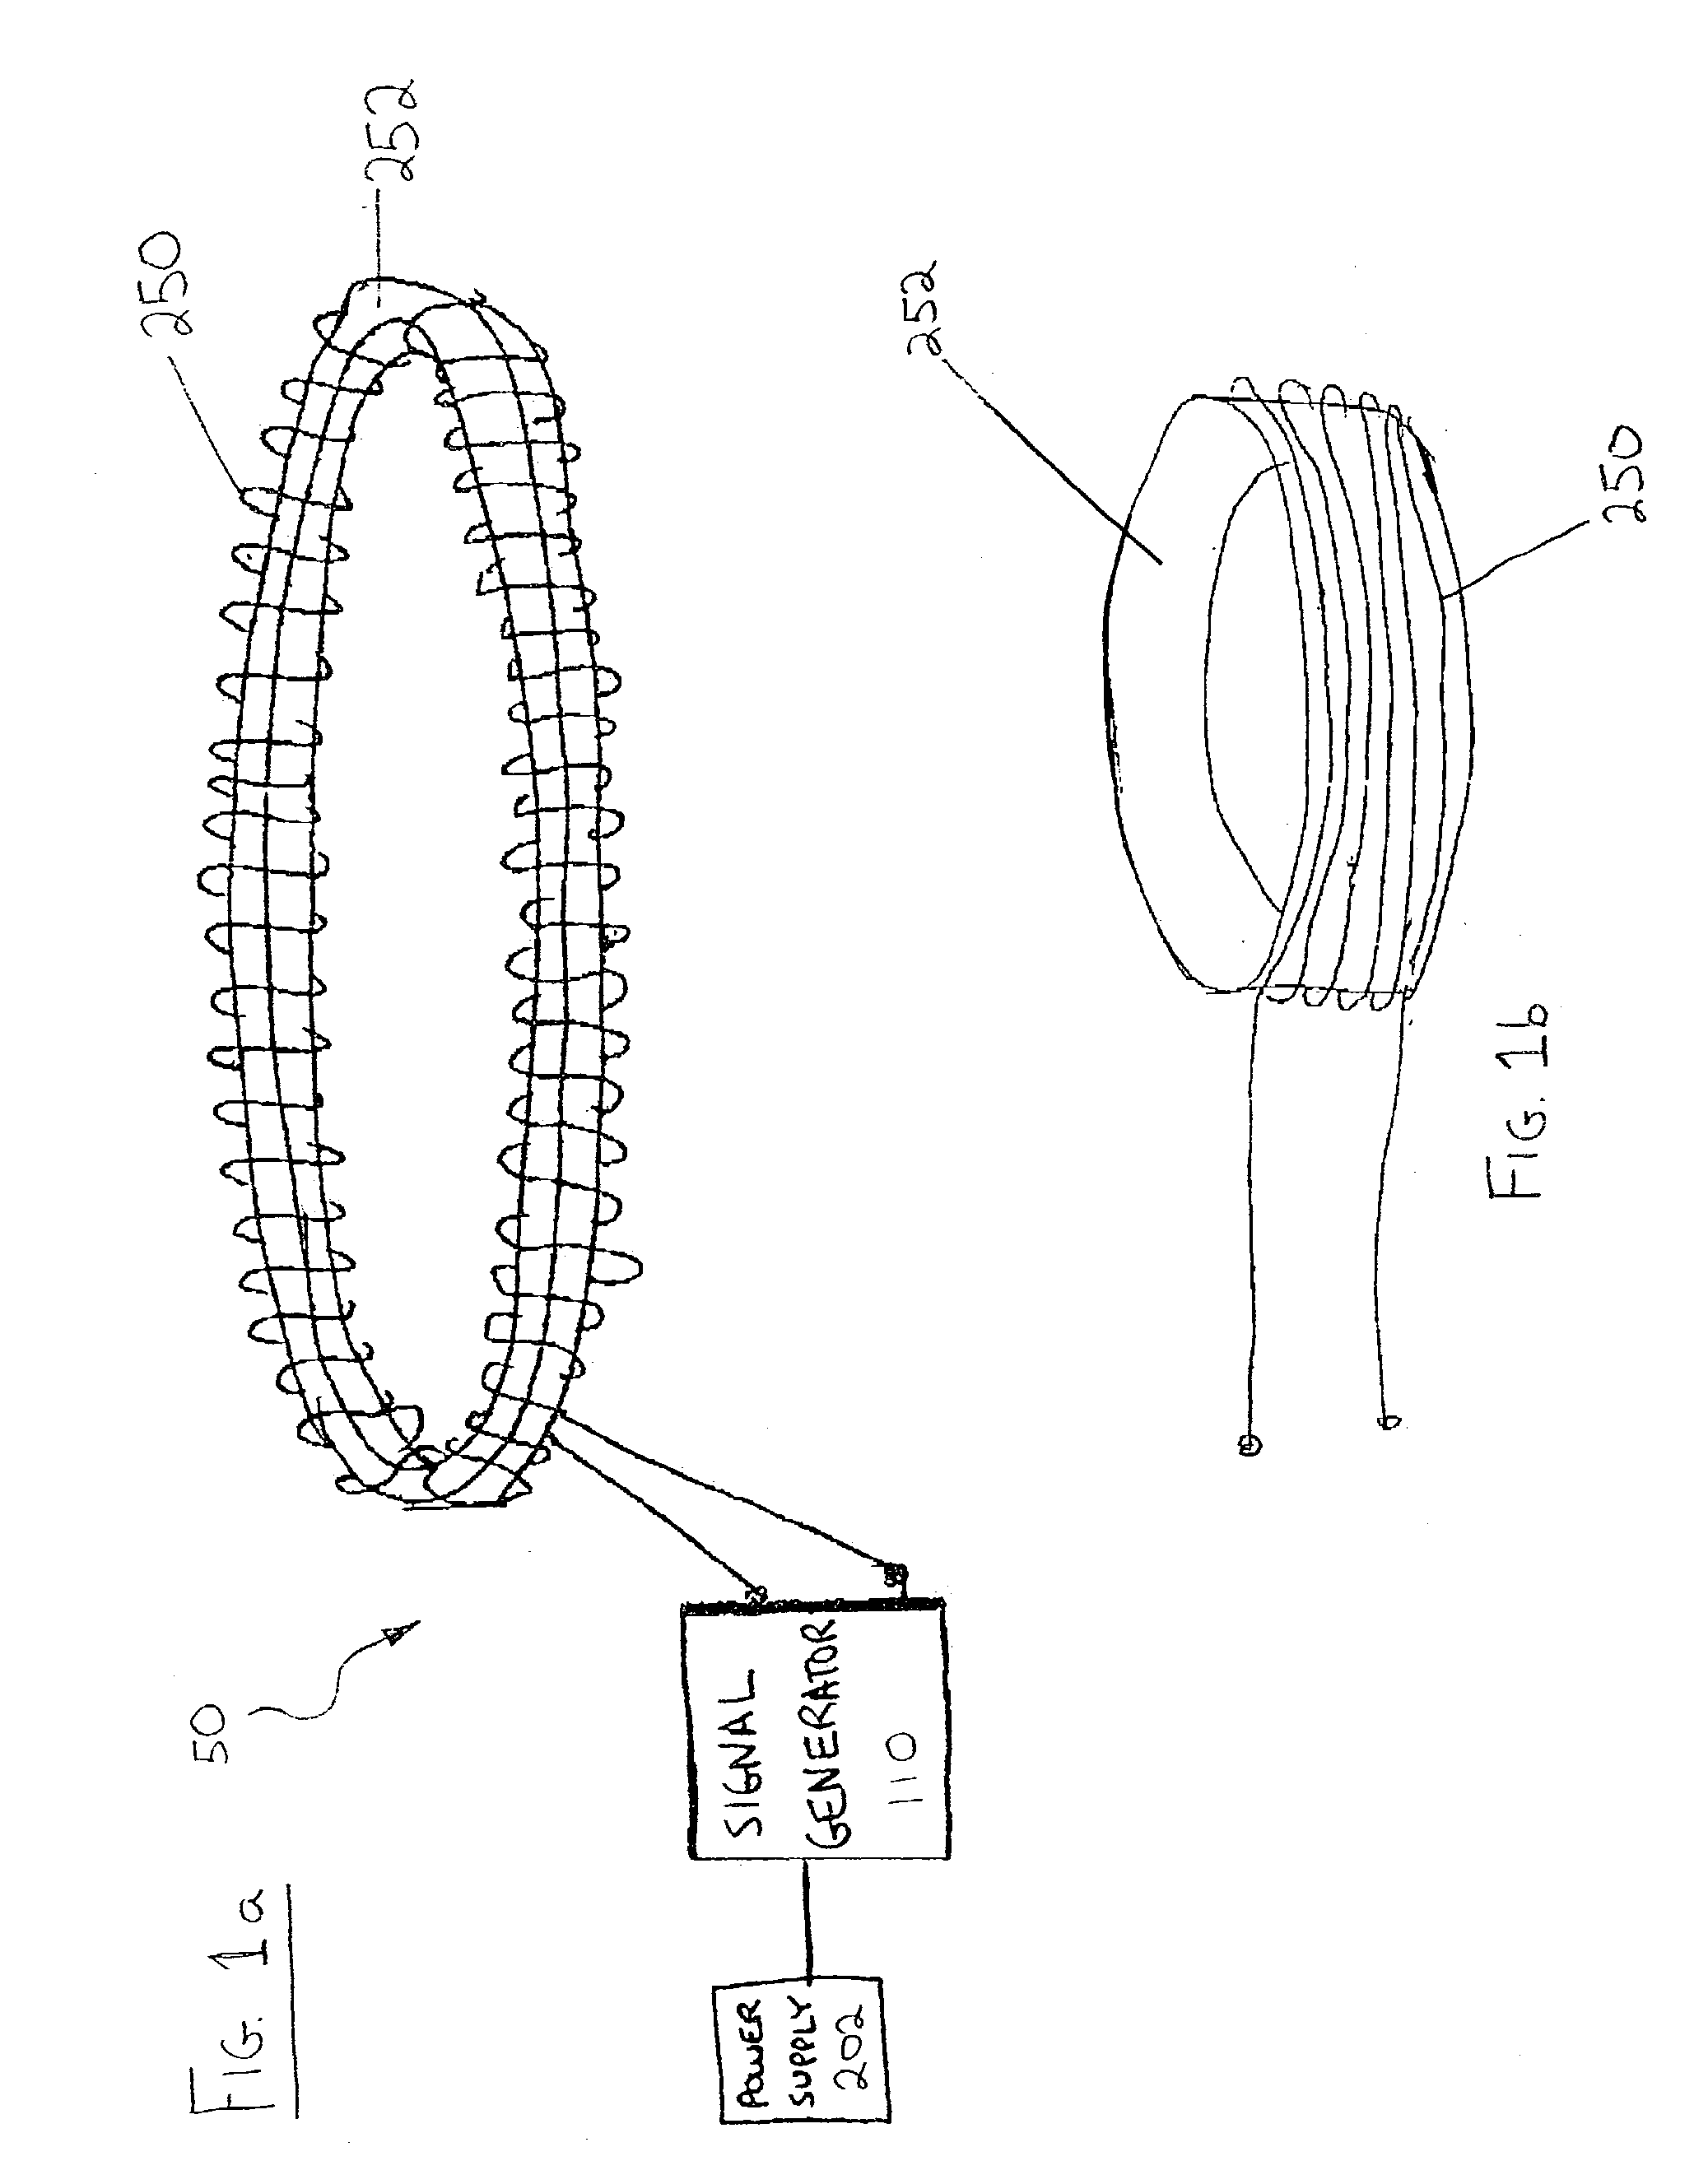 Method and device for restoring kidney function using electromagnetic stimulation